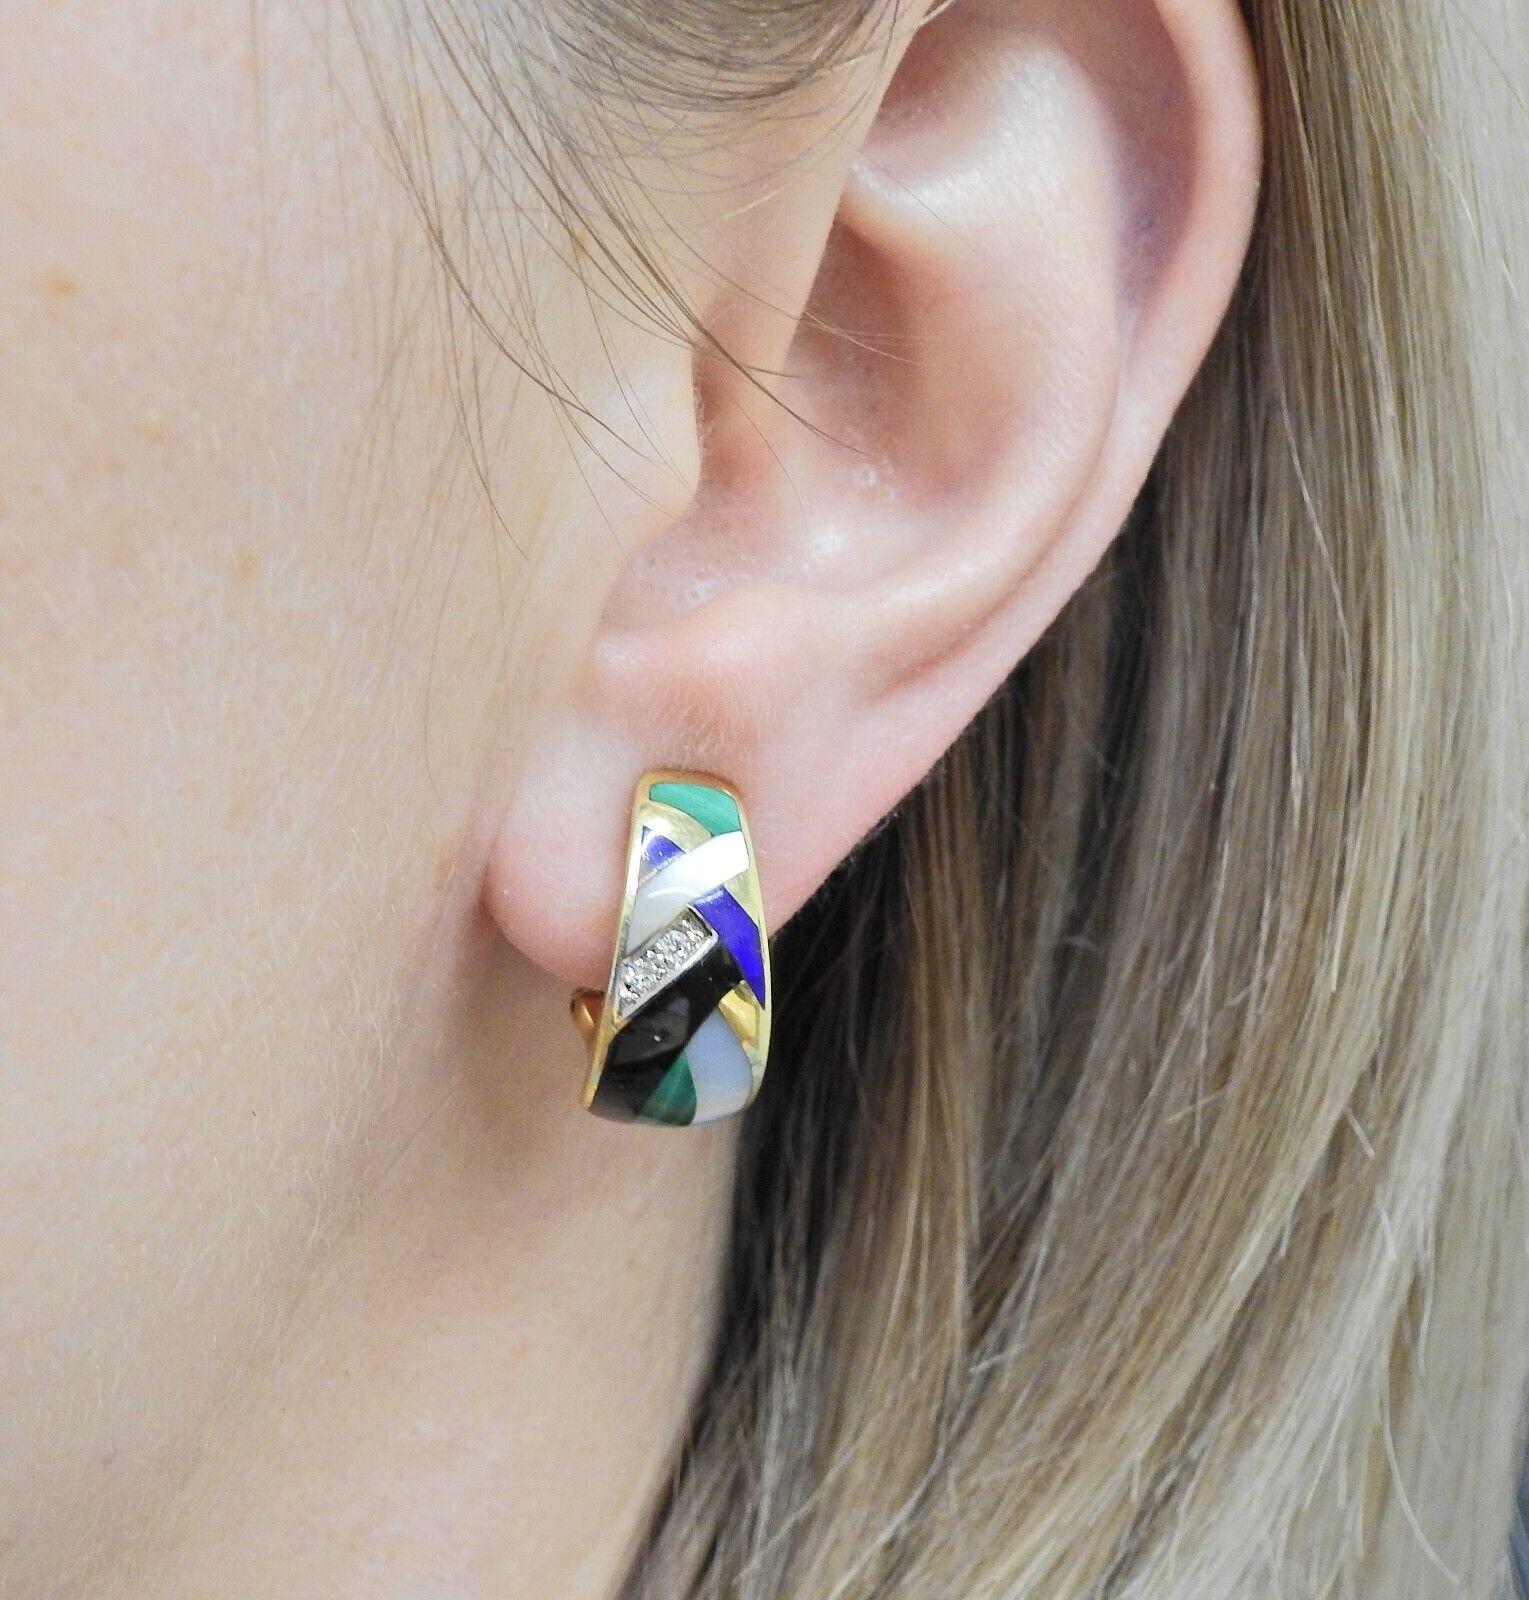 A pair of 14k yellow gold earrings set with mother-of-pearl, malachite, onyx, lapis, coral and diamonds - approx. 0.04ctw.
DIMENSIONS: Earrings 21mm x 10mm. 8.9 grams.